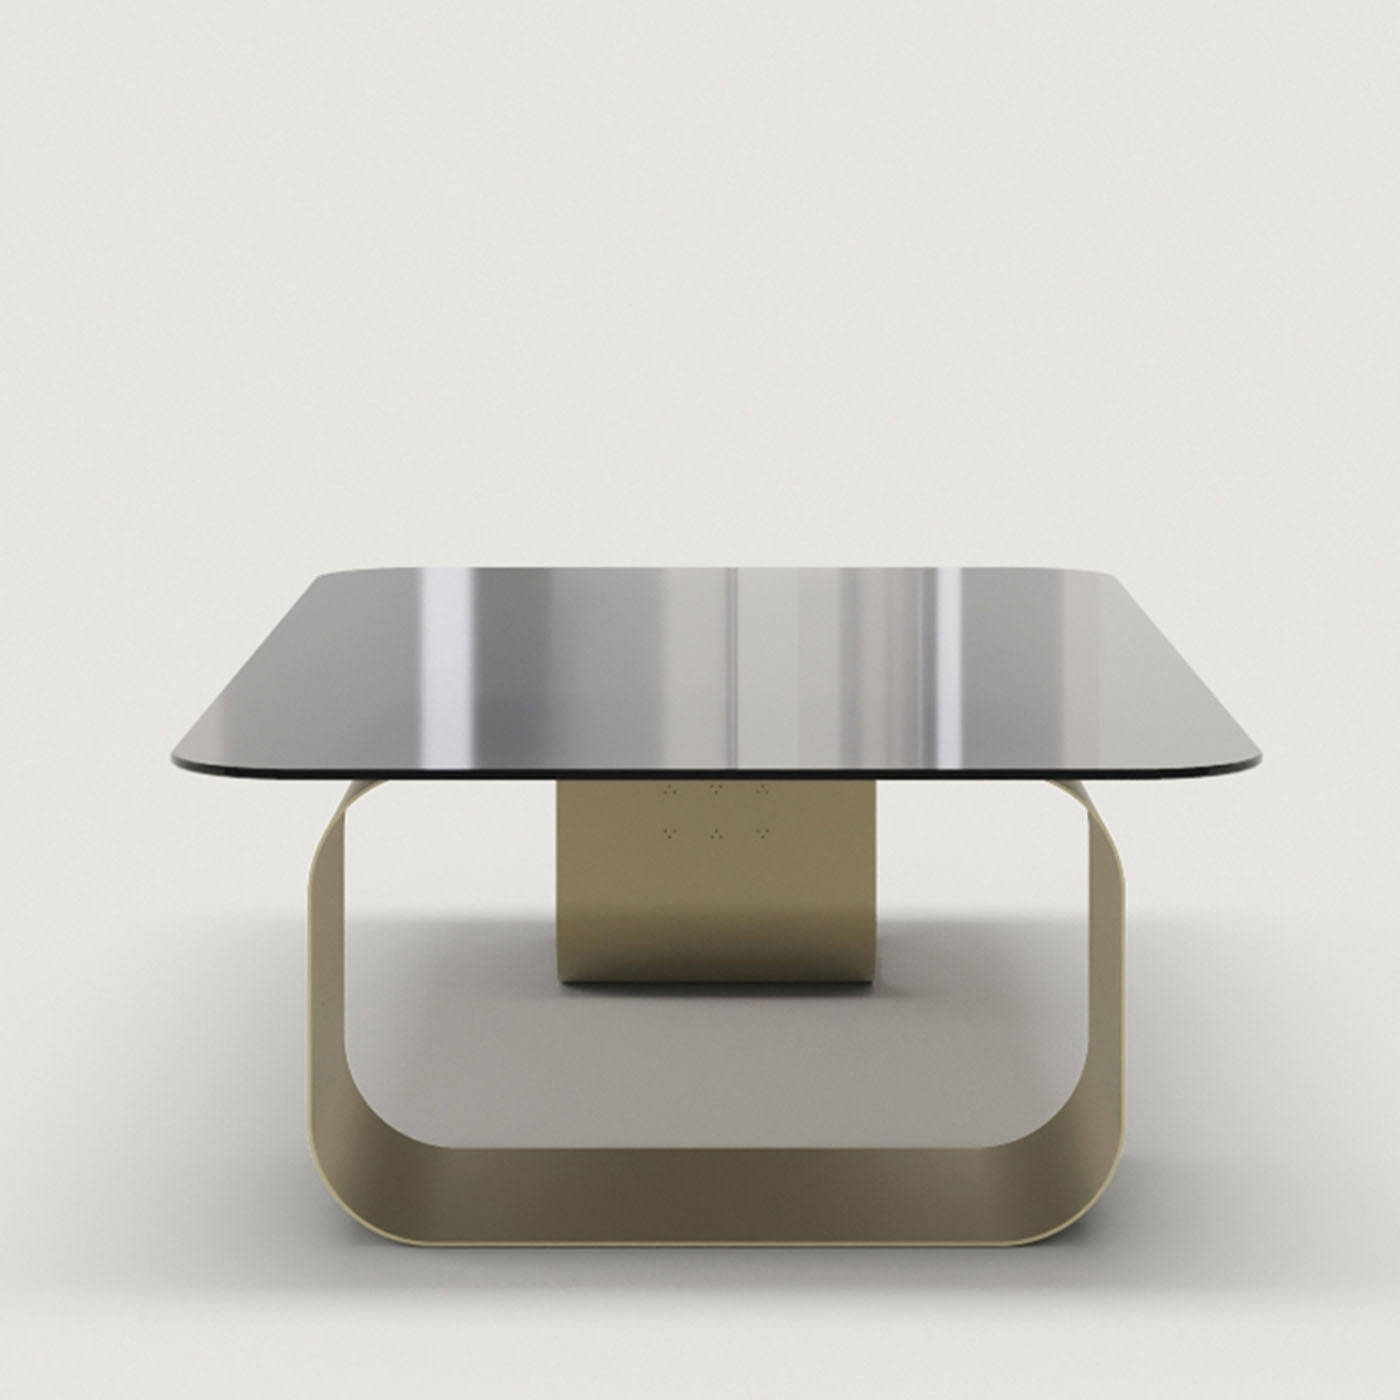 Maiz Large Glass and Steel Coffee Table - Alternative view 3